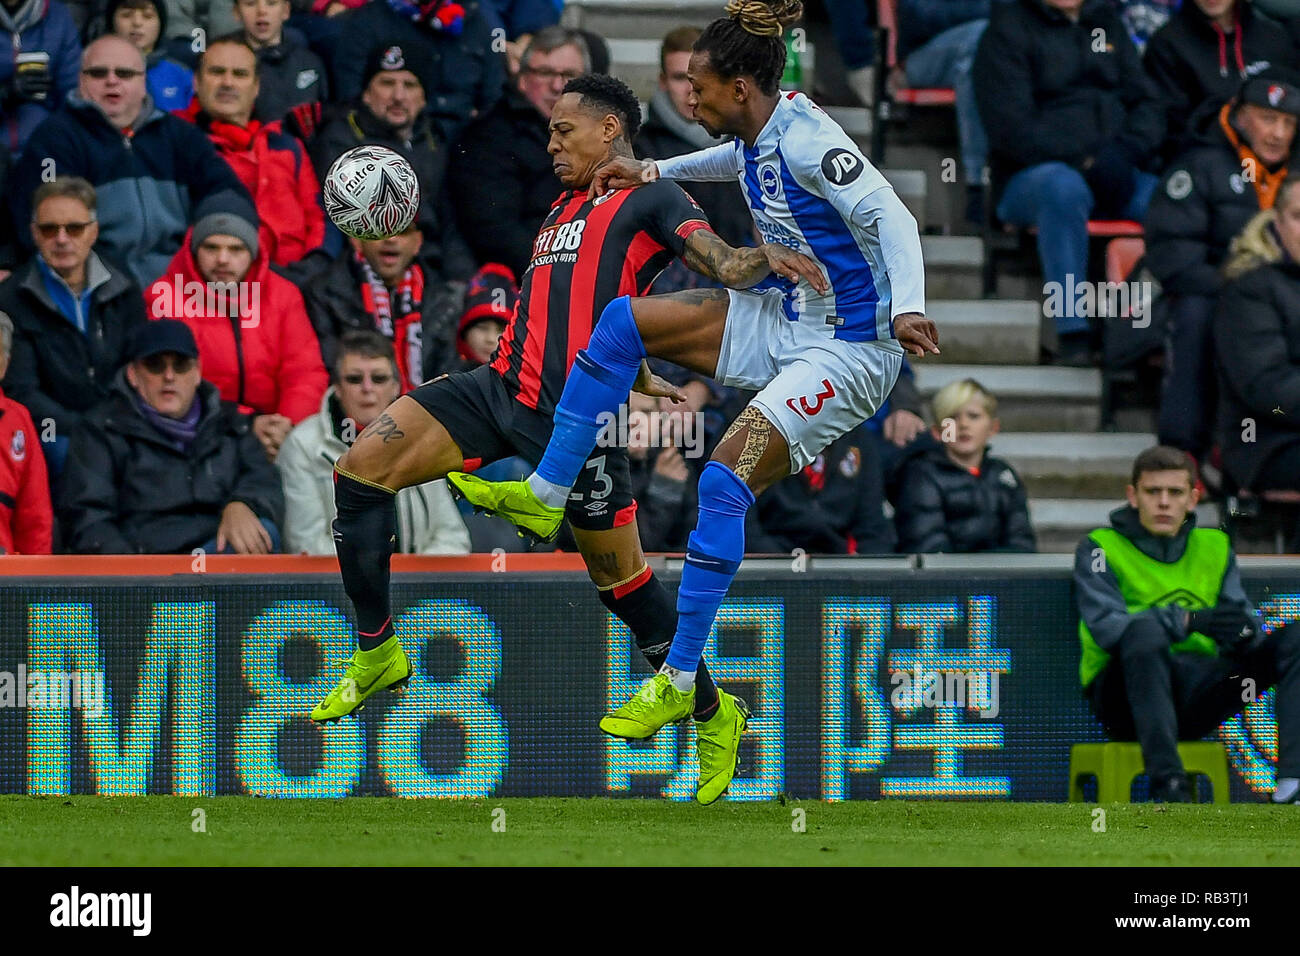 5th January 2019, Dean Court, Bournemouth, England; The Emirates FA Cup, 3rd Round, Bournemouth vs Brighton ; Gaëtan Bong (03) of Brighton tackles Nathan Clyne (23) of bournemouth  Credit: Phil Westlake/News Images   English Football League images are subject to DataCo Licence Stock Photo